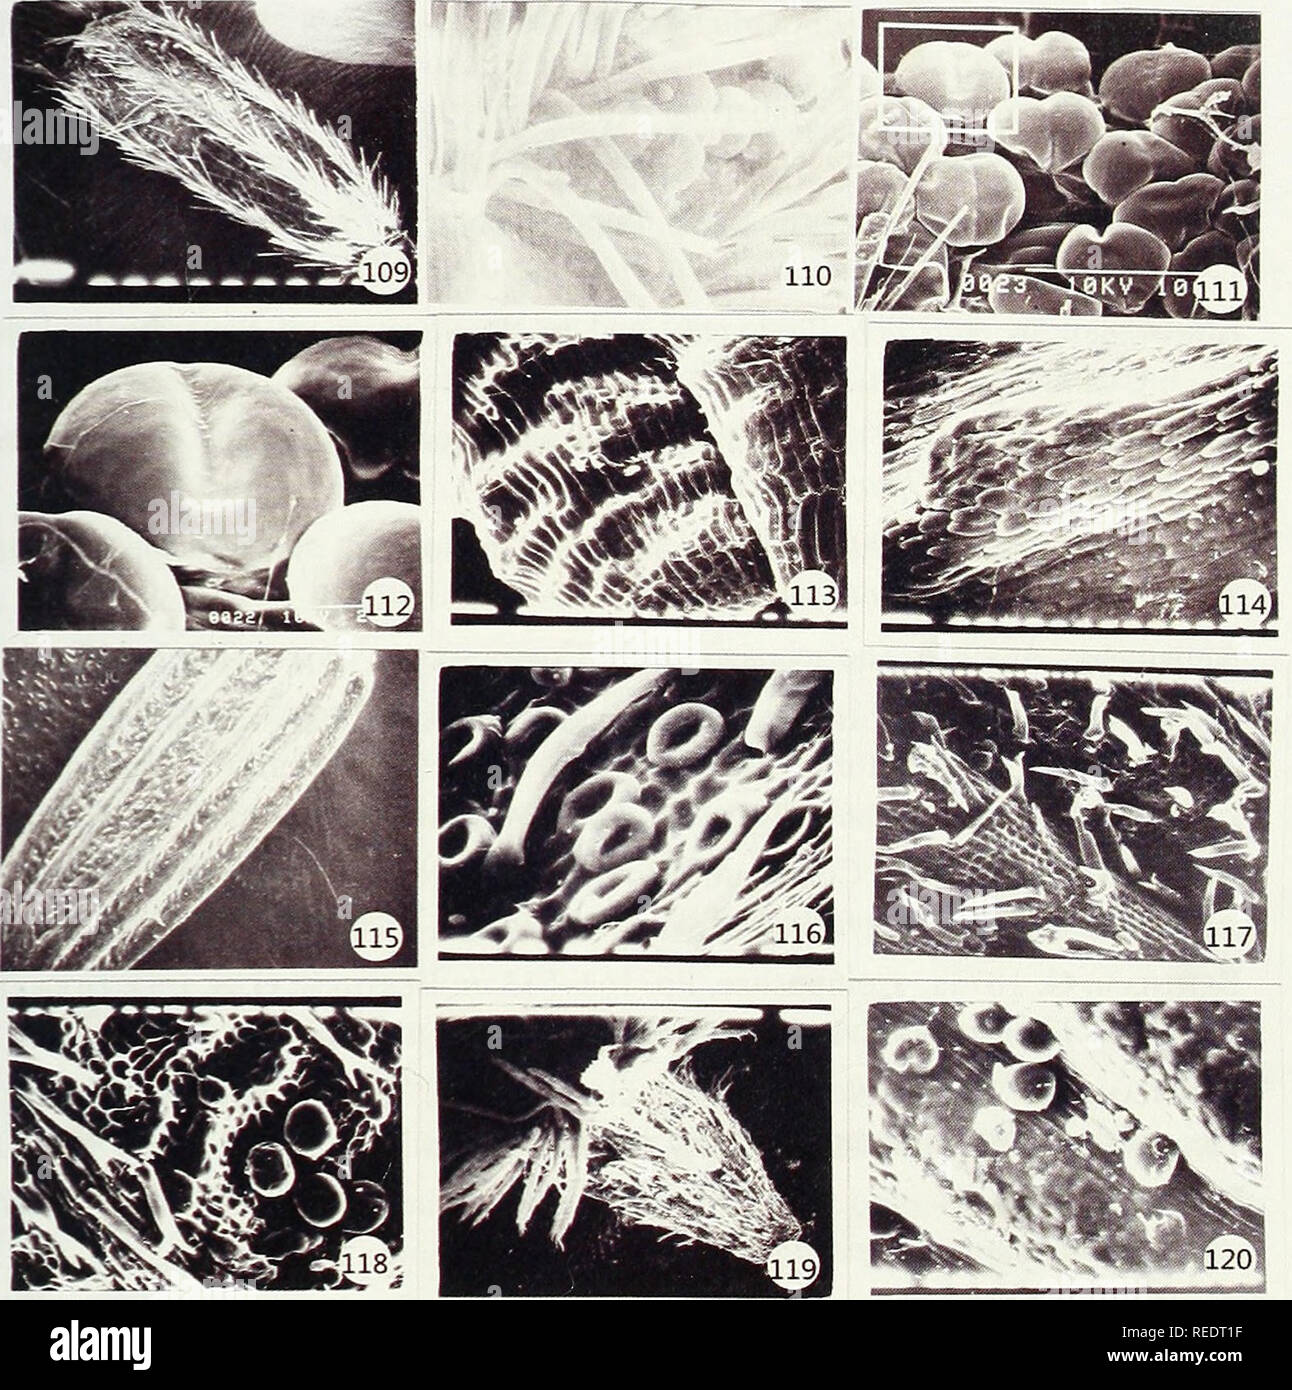 . Compositae newsletter. Compositae. Comp. Newsl. 50, 2012 113. Figs. 109-120. SEM photographs showing the structure and distribution of cypselar hairs. Figs. 109, 110: Polydora bainesii, x 50; x 400. Figs.lll, 112: Rolandra fruticosa. Fig. 113: Sonchus brachyotus, x 400. Fig. 114: Tragopogon porrifolius, x 400. Fig. 115: Vanillosmopsis capitata, x 50. Fig. 116: Vernonia cistifolia, x 800. Fig. 117: Vernonia glabra, x 200. Fig. 118: Vernonia petersii, x 400. Fig. 119: Vernonia scorpioides, x 100. Fig. 120: Vernonia colorata ssp. colorata, x 400.. Please note that these images are extracted fro Stock Photo